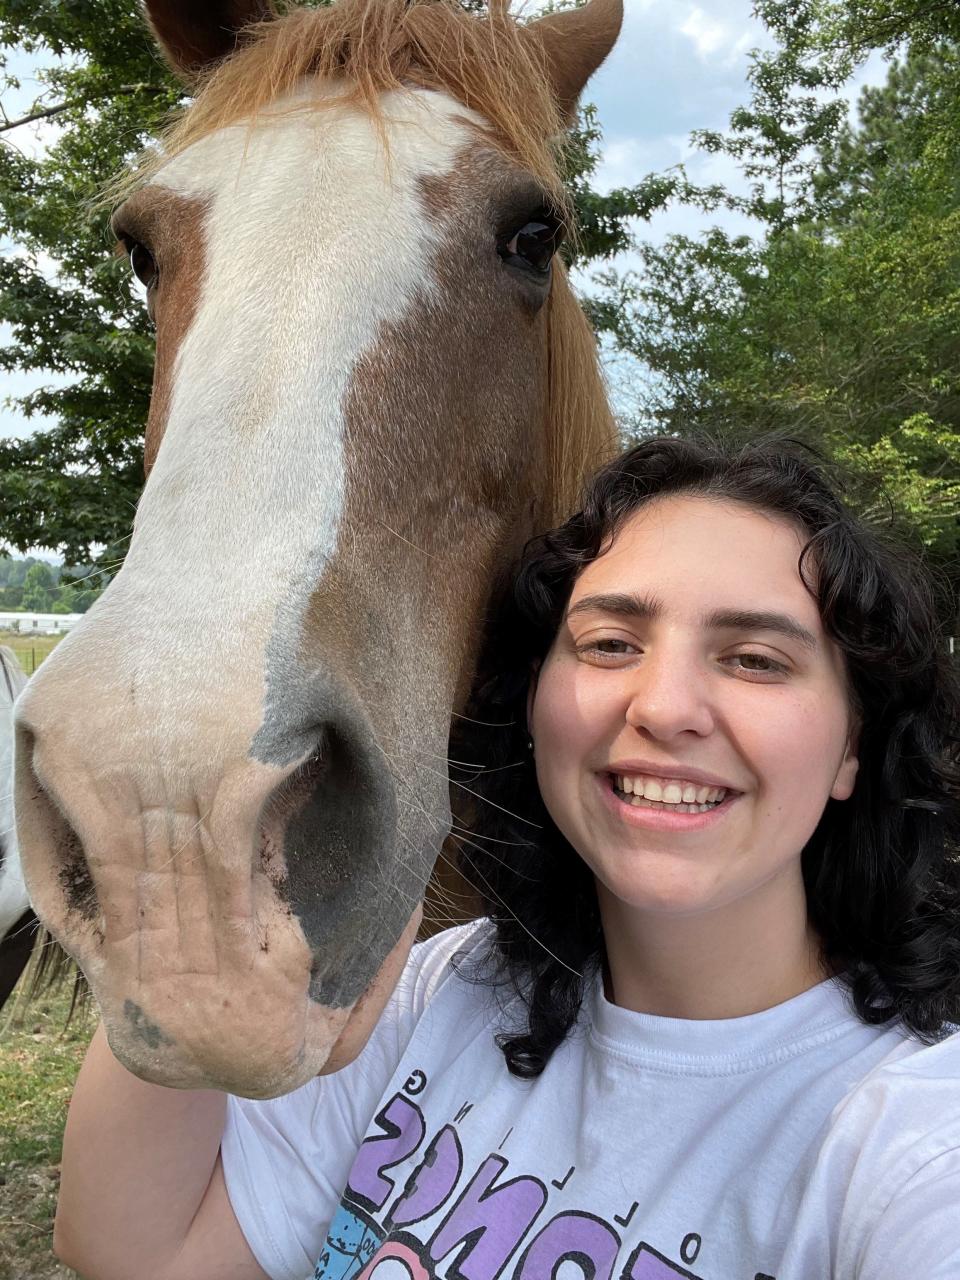 Living Democracy student Payton Davis smiles beside a horse in her summer community of Collinsville.